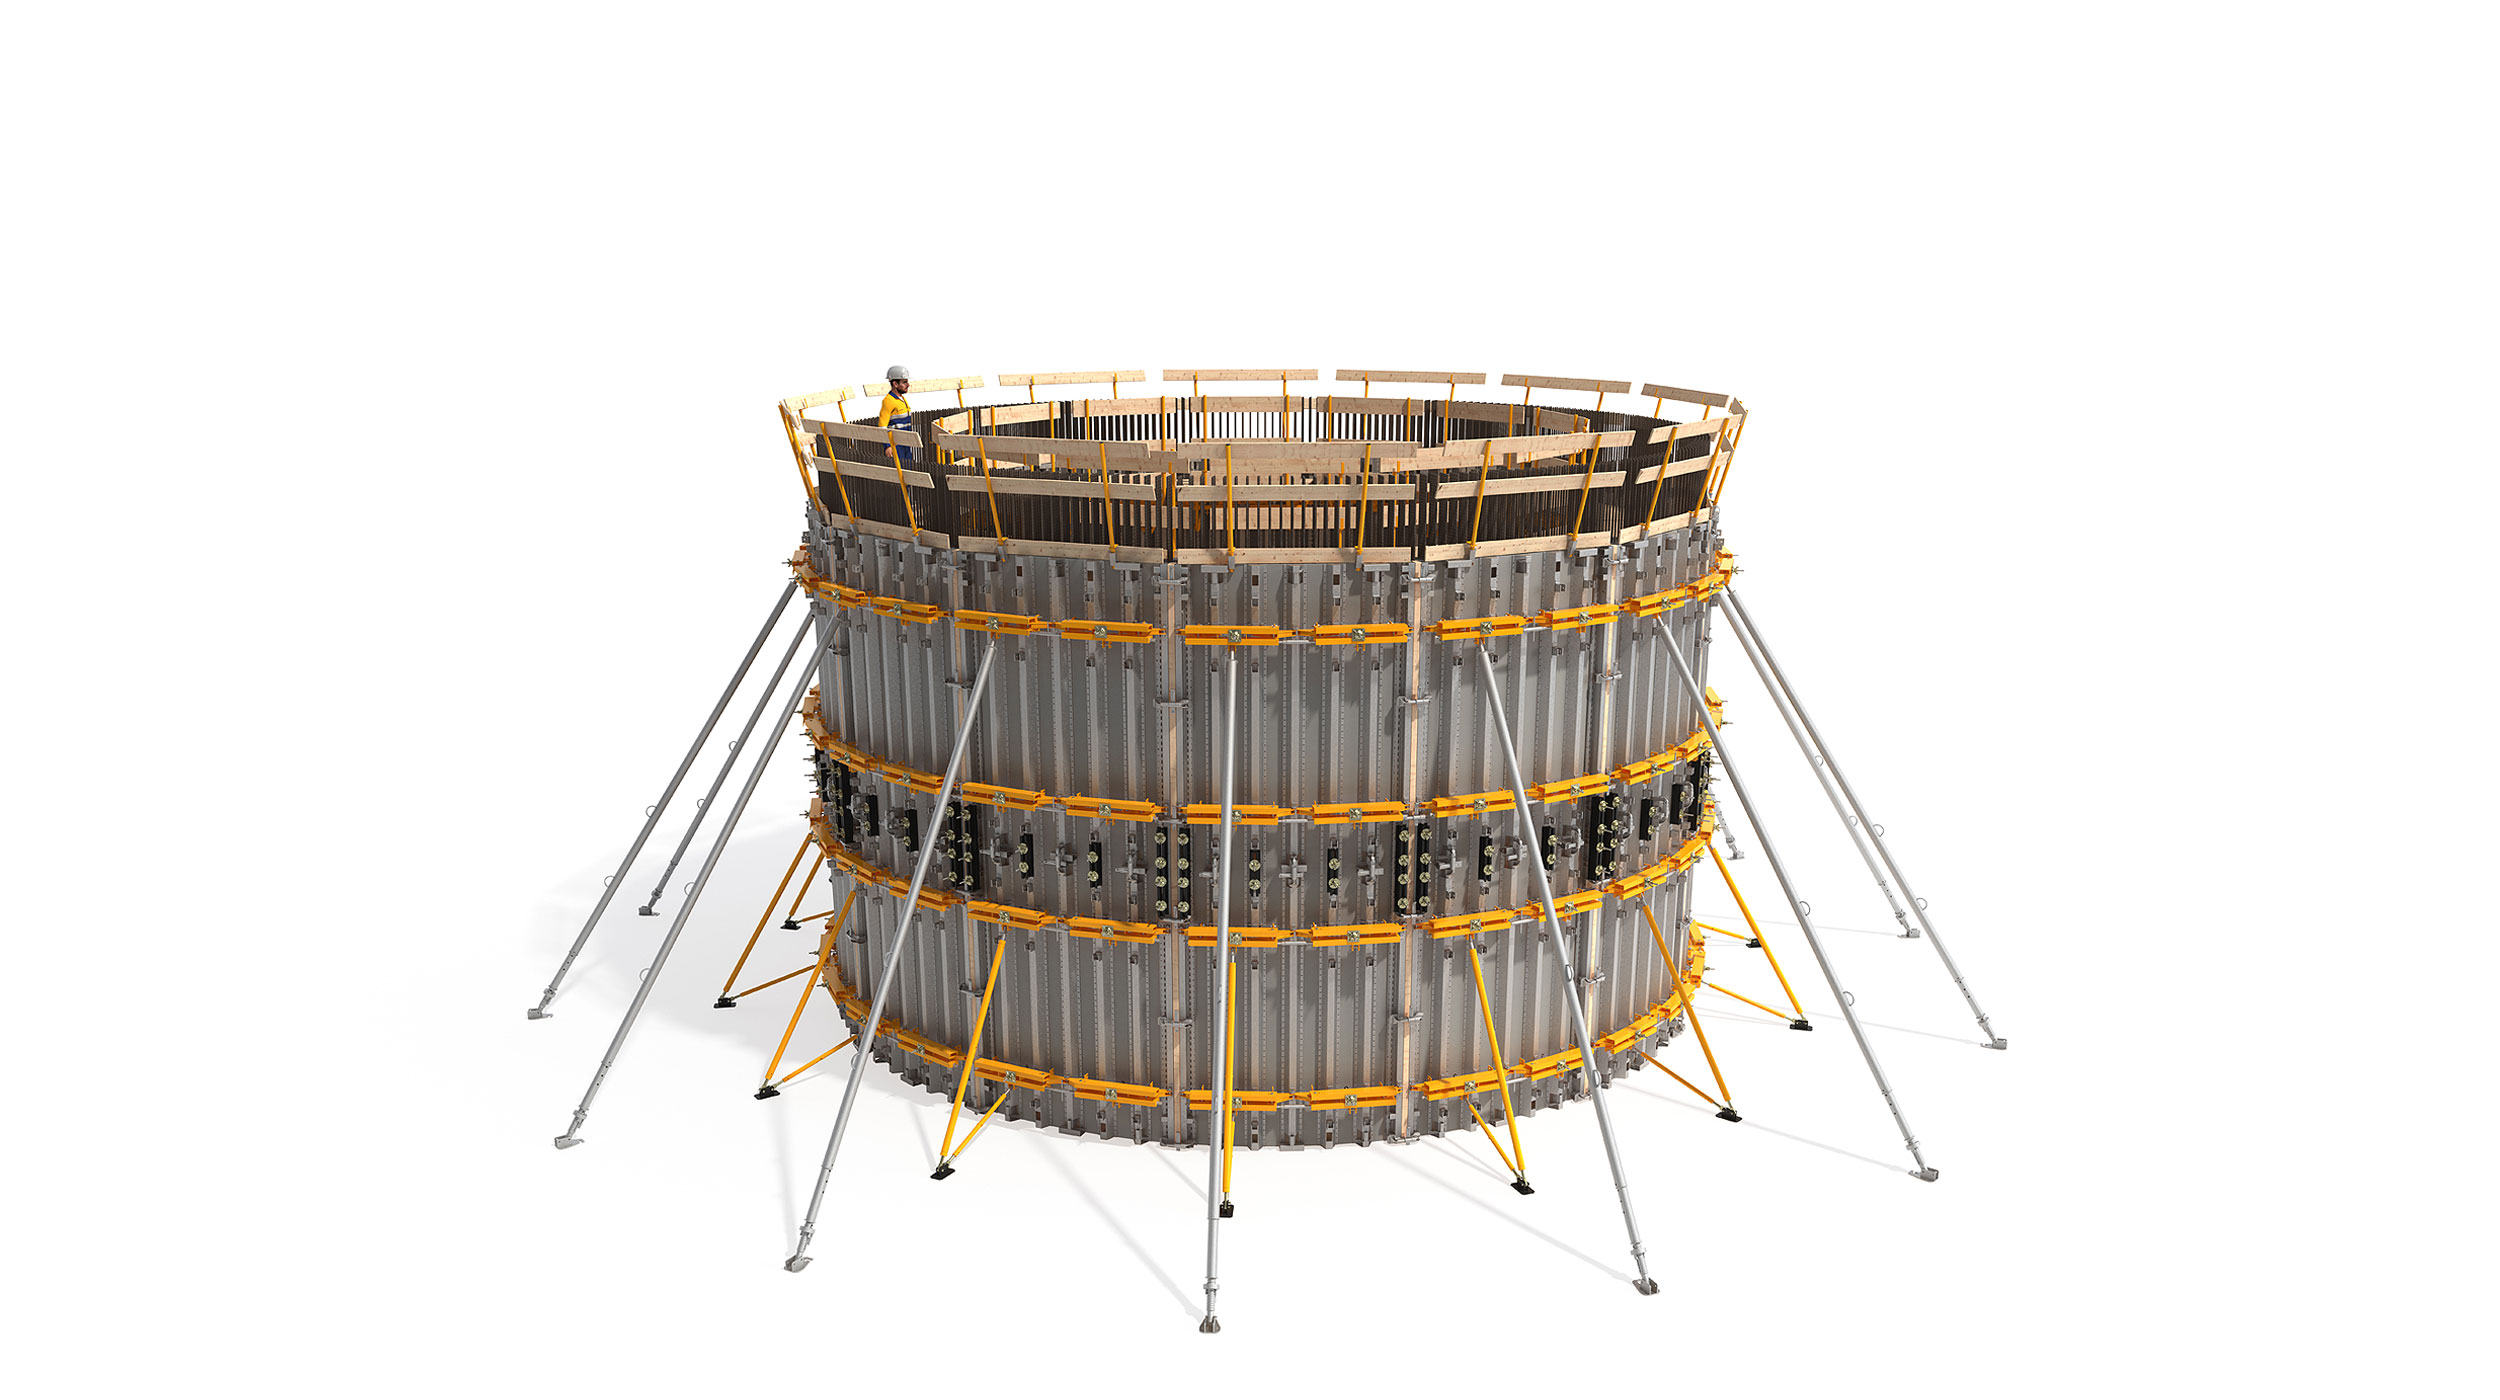 An optimized formwork system for curved wall construction. Robust and extremely fast to curve. Most suitable for energy sector concrete structures.